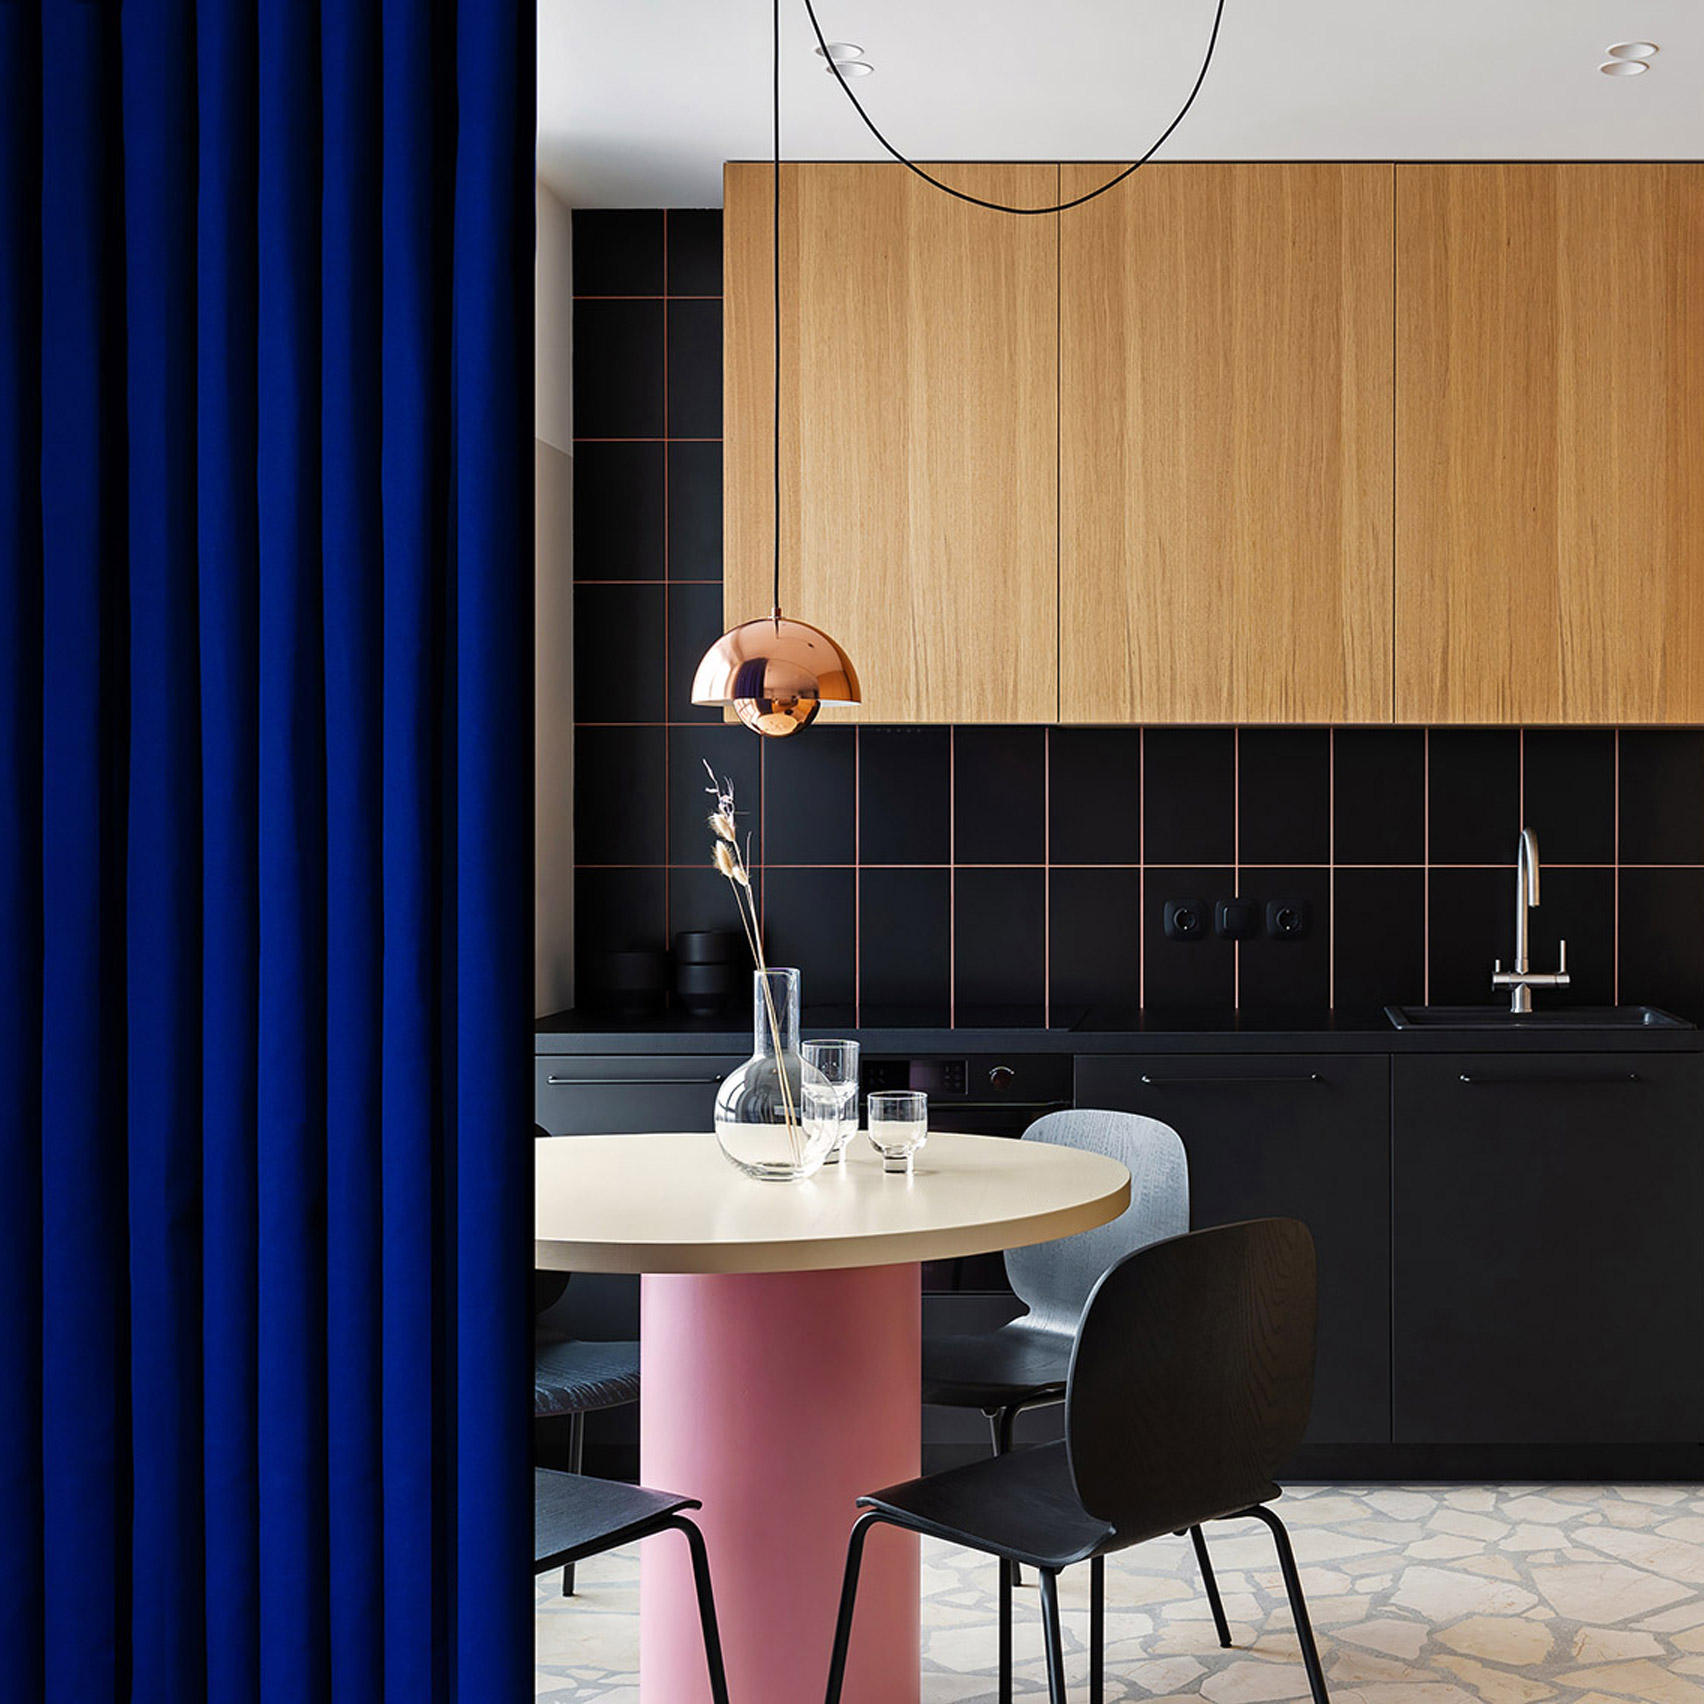 Dezeen's top home interiors of 2020: EGR Apartment by Ater Architects